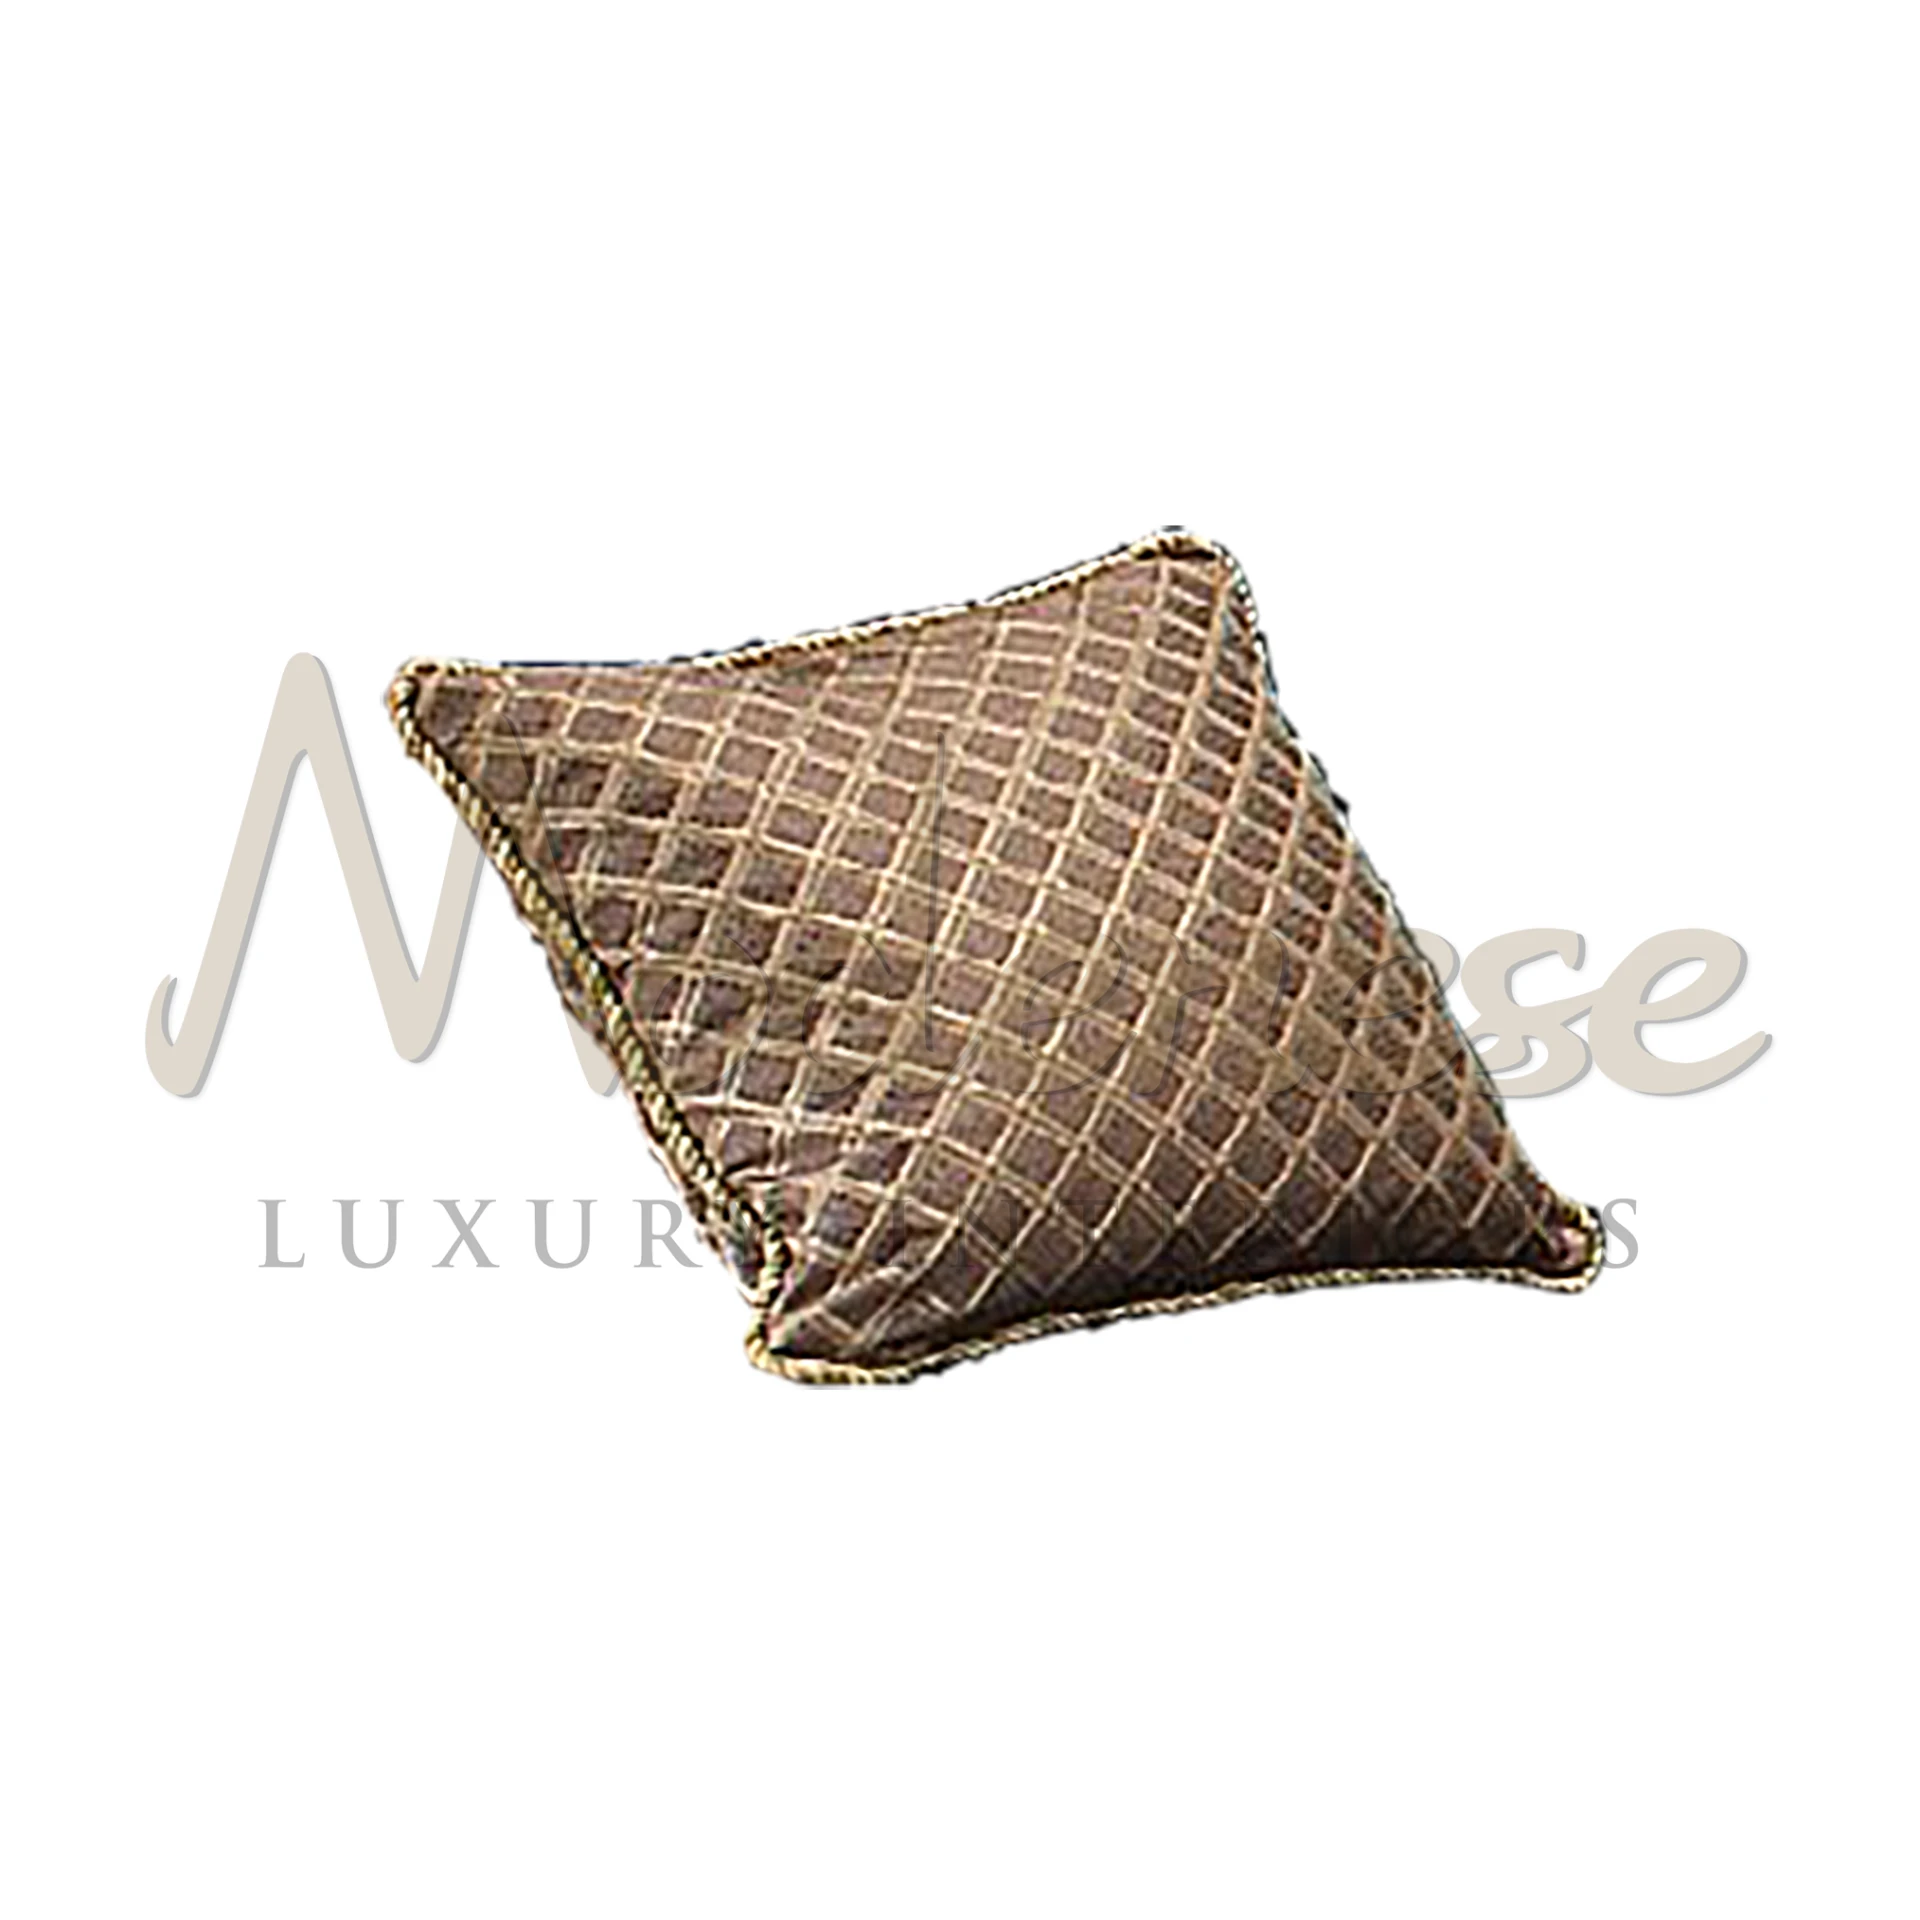 Royal Pillow: A symbol of majesty, featuring regal design elements and superior craftsmanship for a luxurious statement.